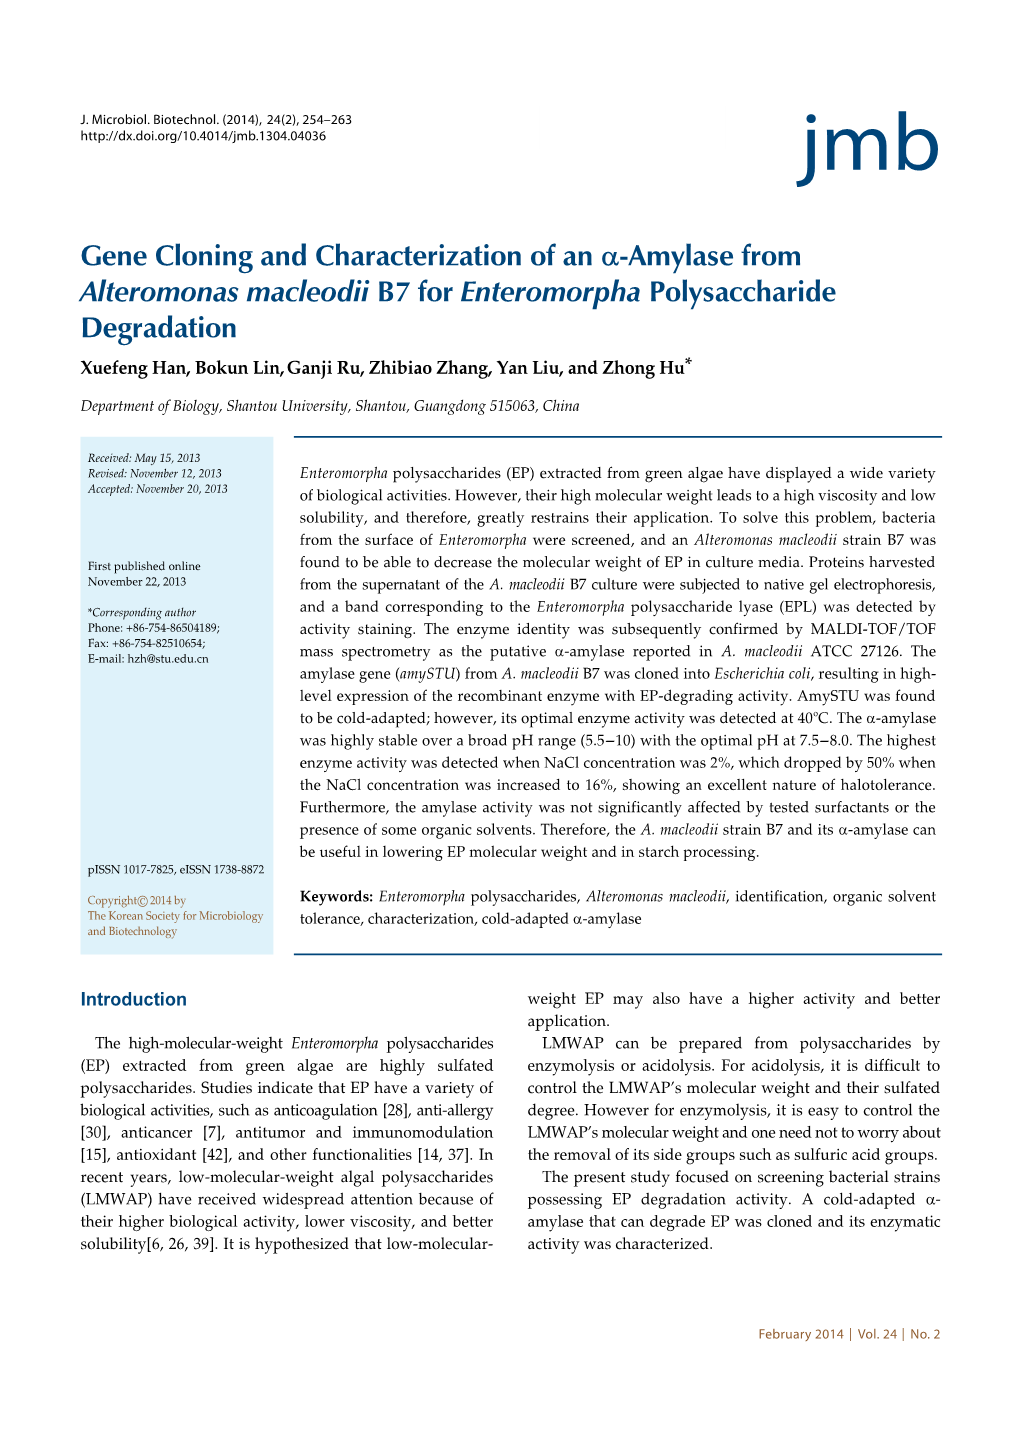 Gene Cloning and Characterization of an Α-Amylase from Alteromonas